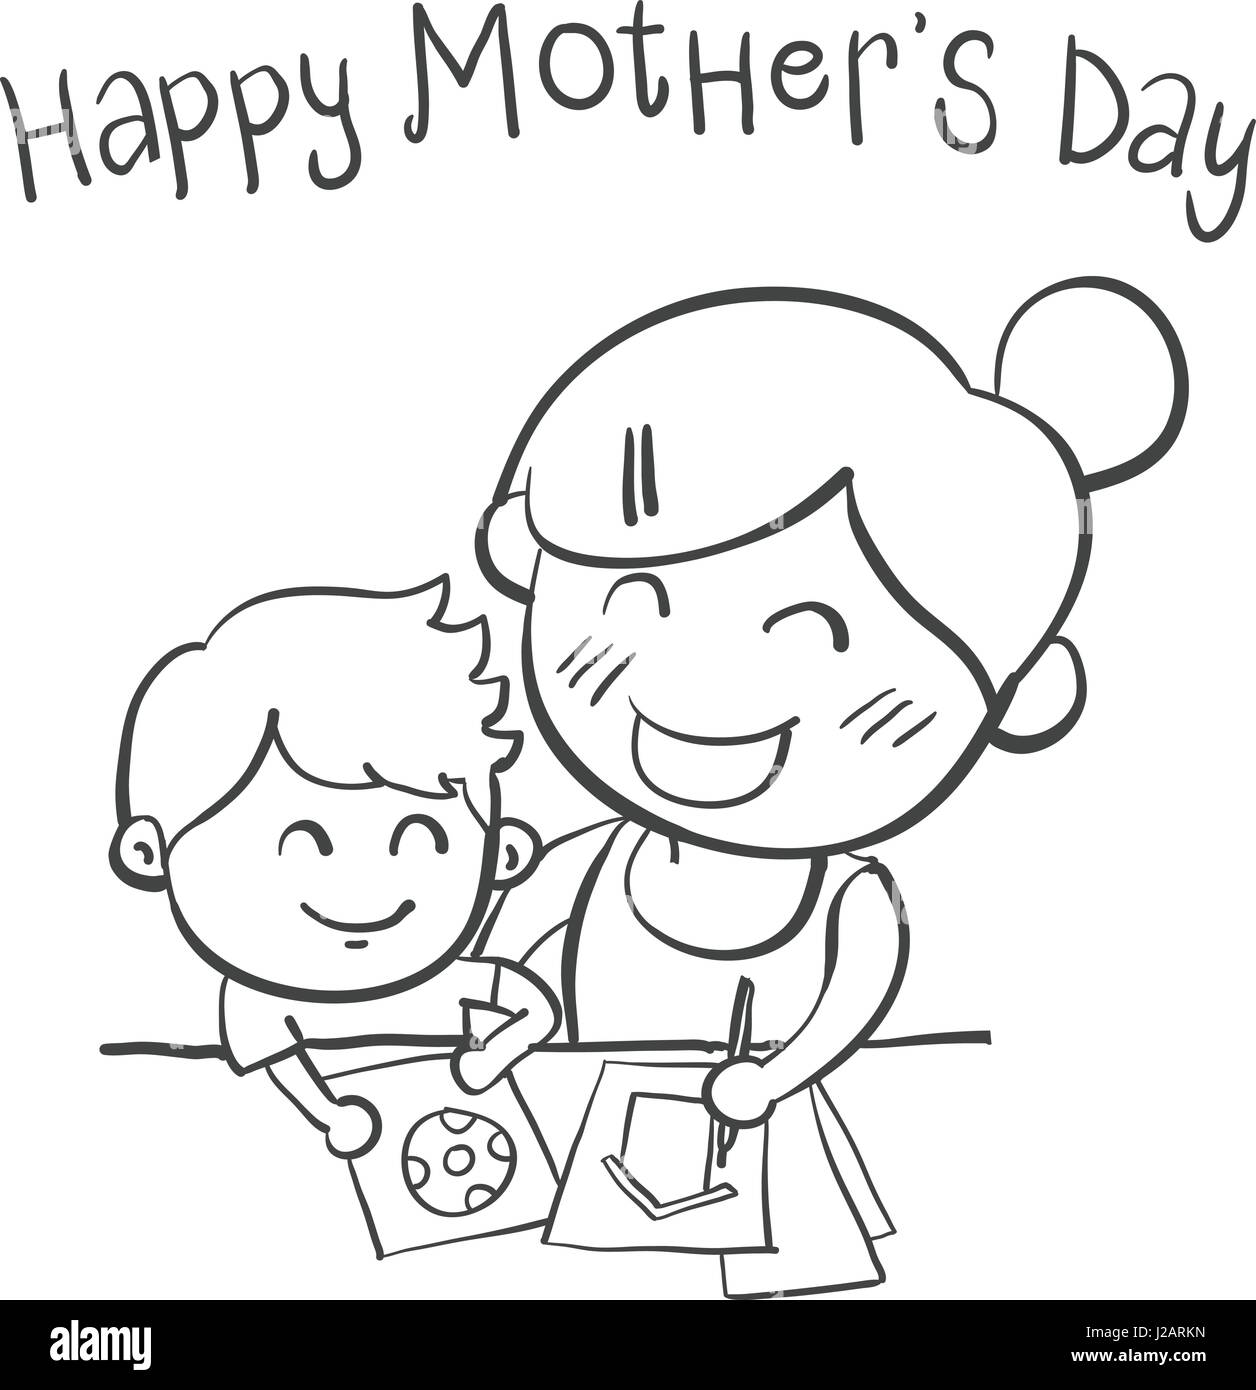 Free Vector | Hand drawn mothers day children drawings illustration-saigonsouth.com.vn